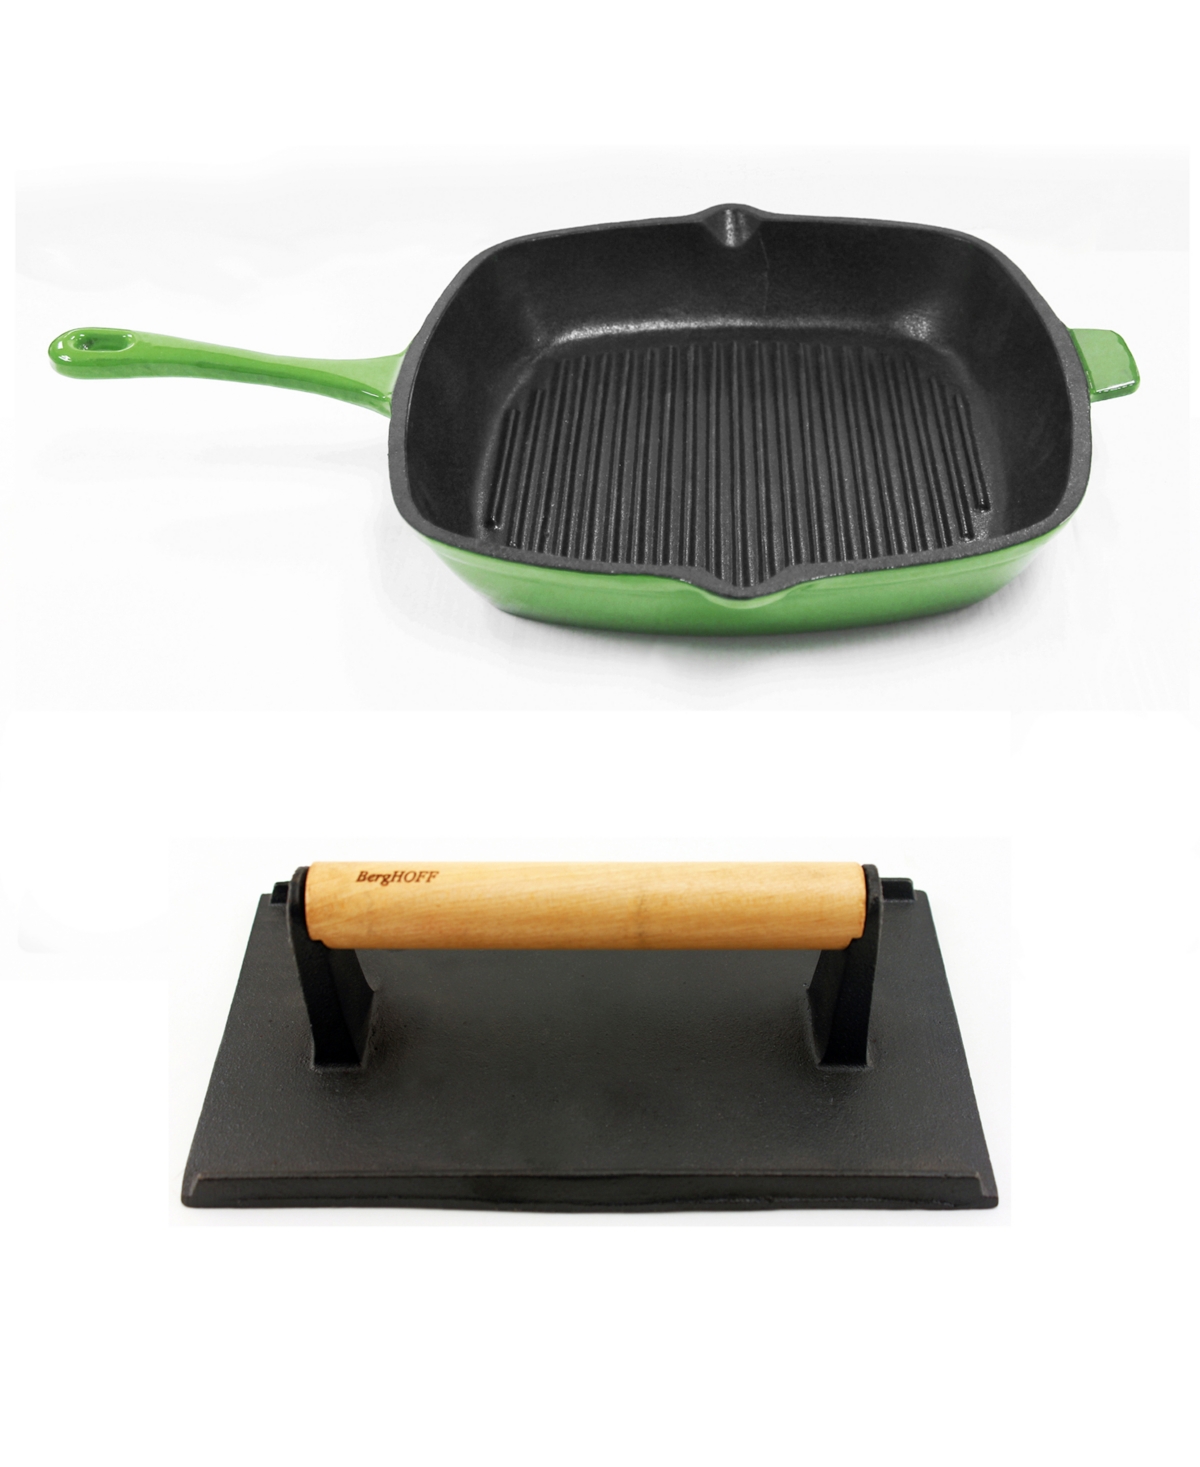 Berghoff Neo Cast Iron 11" Grill Pan And Press In Green